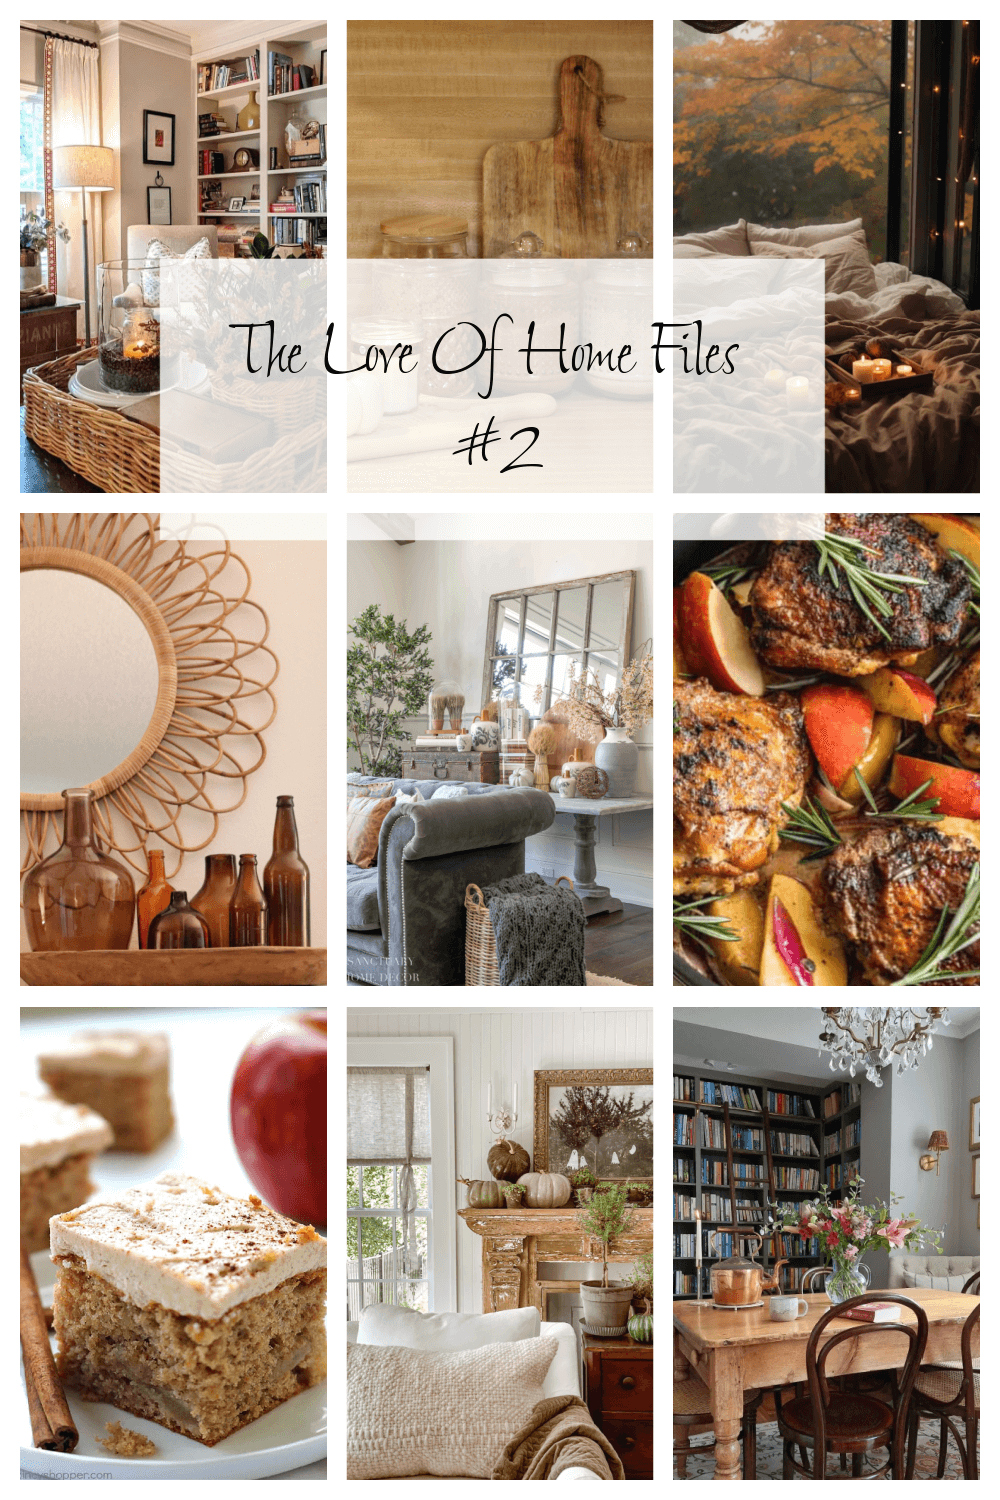 The Love Of Home Files #2